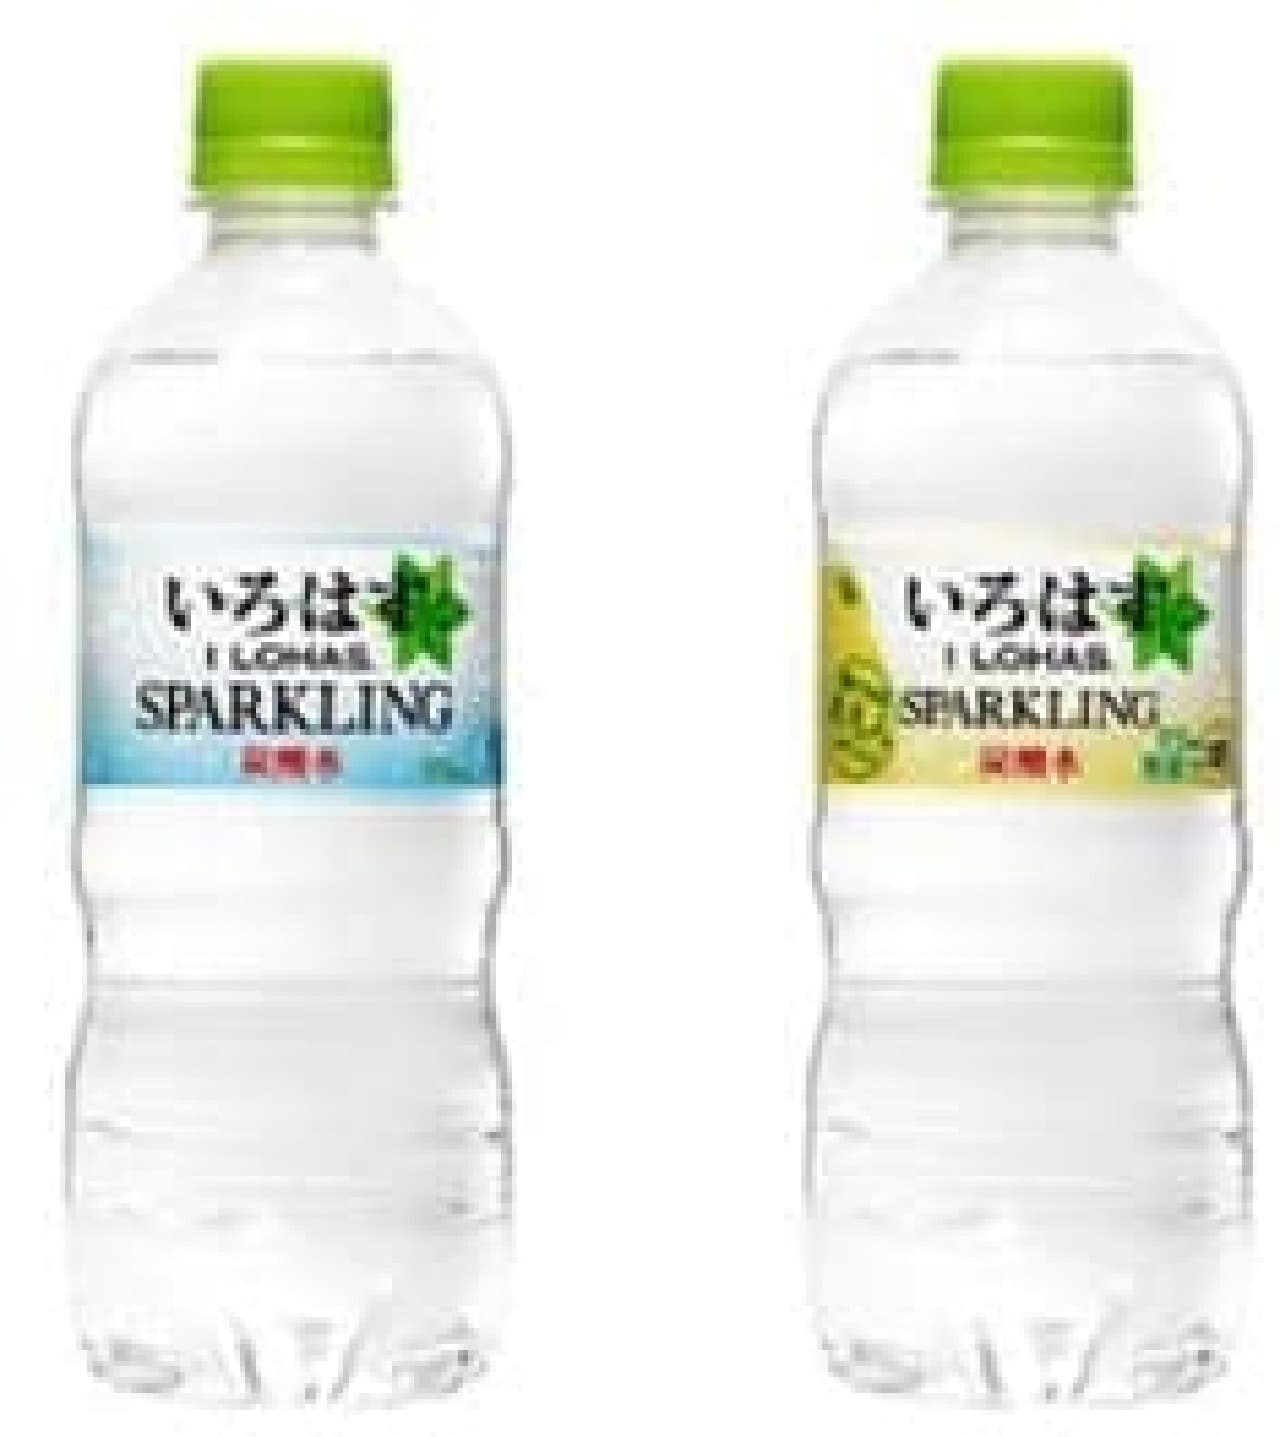 Two types of sparkling from "I LOHAS"